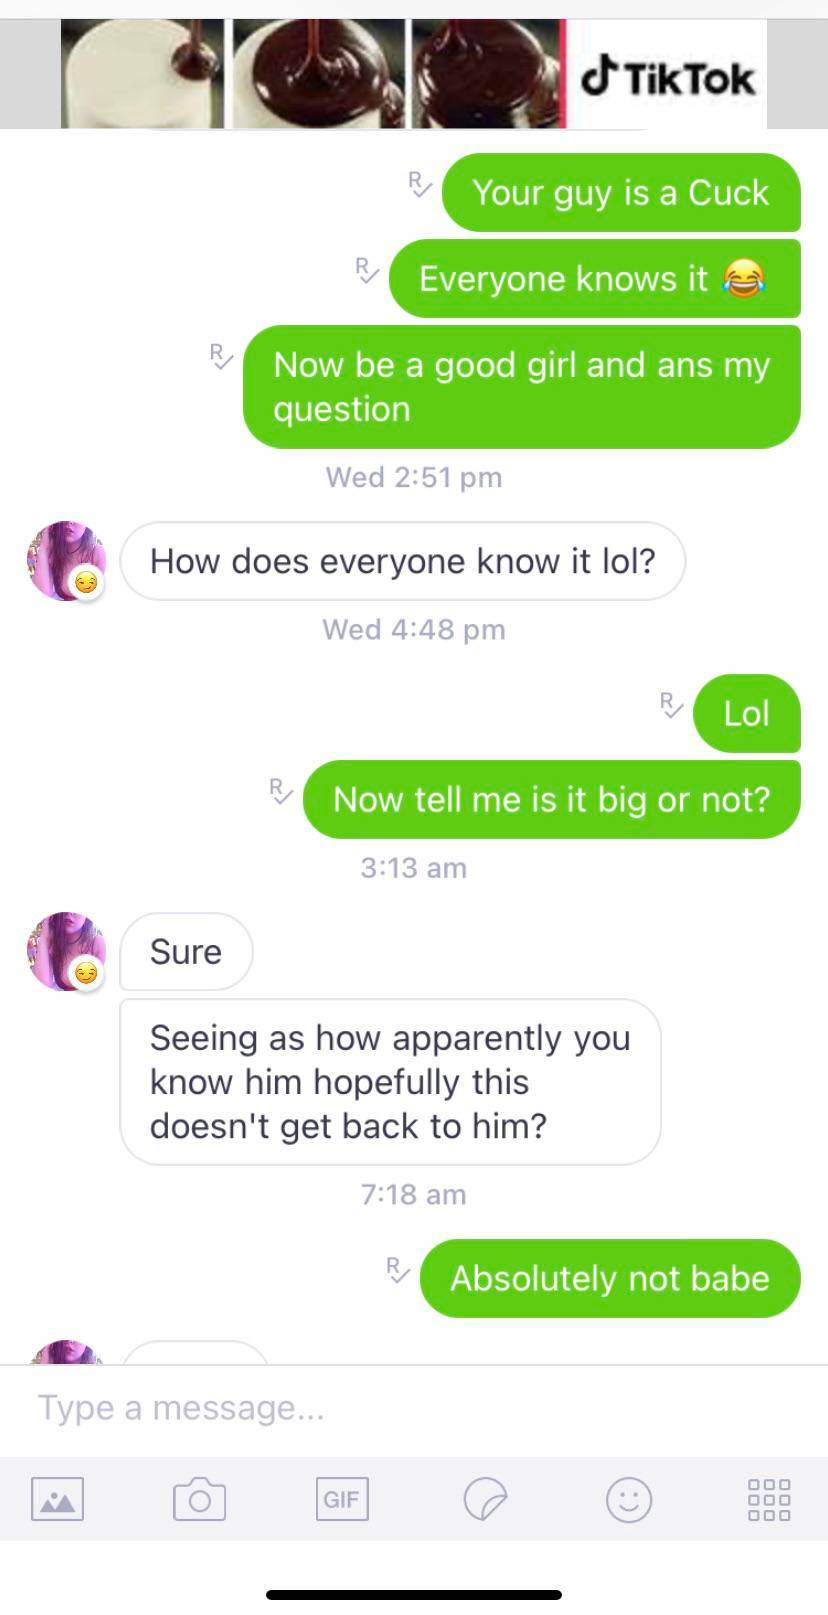 Another Slut Failed Even She Knows Her Guy Is A Renowned Cuck 😂 Test Your Girl Now Kik